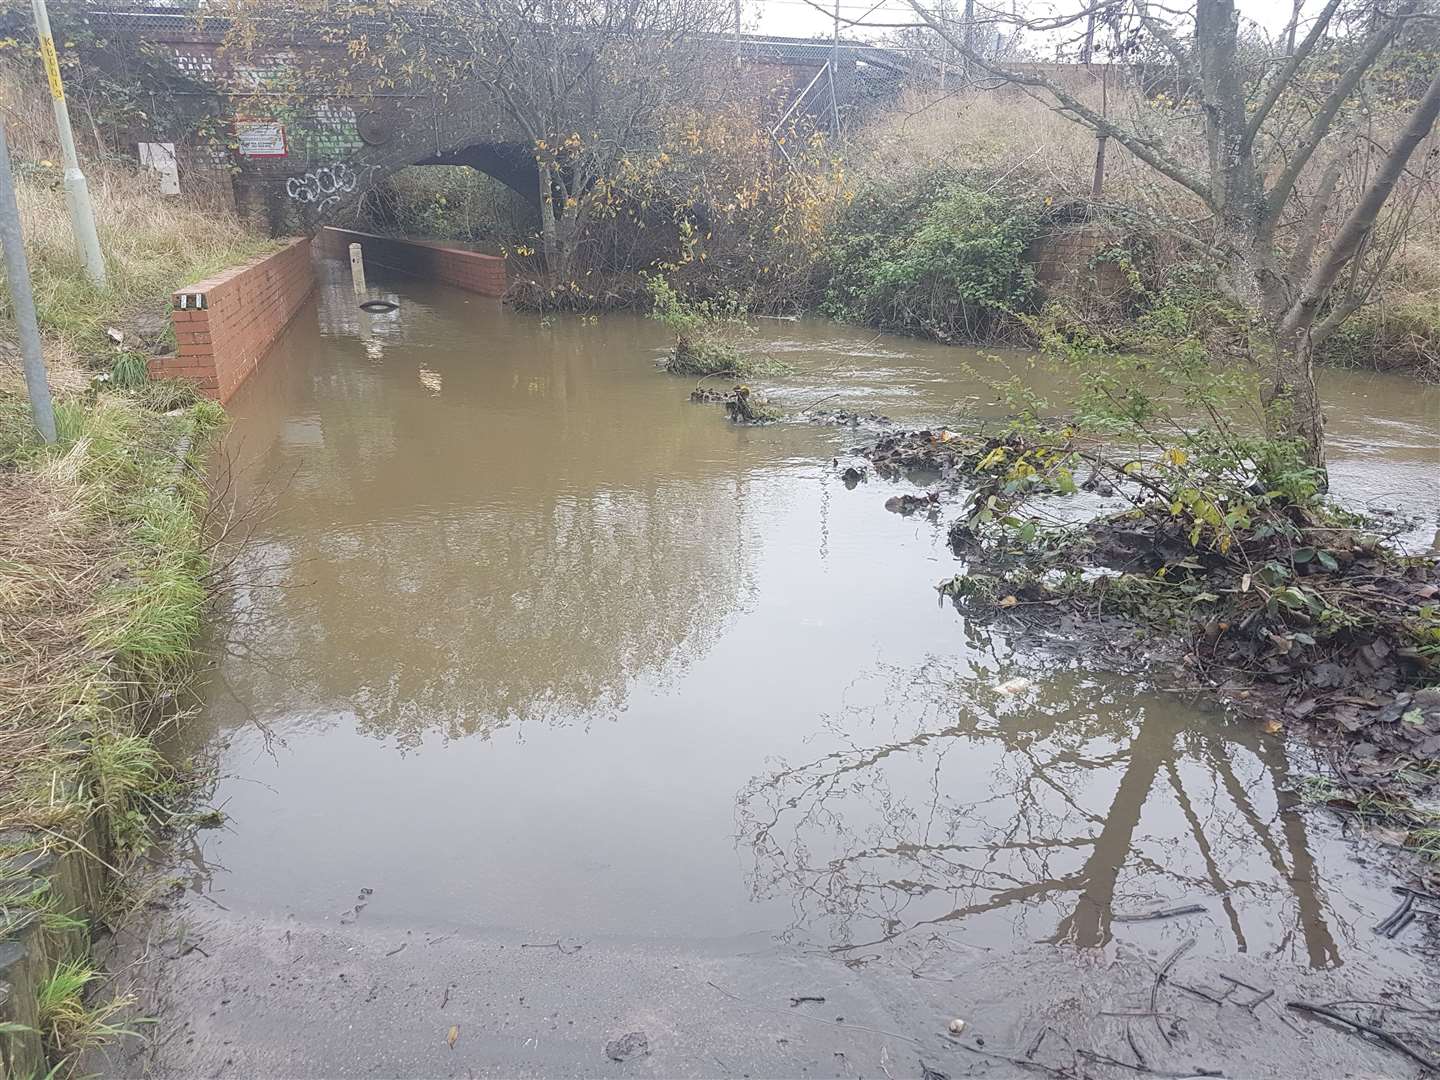 An underpass next to the car park has been completely cut off by water